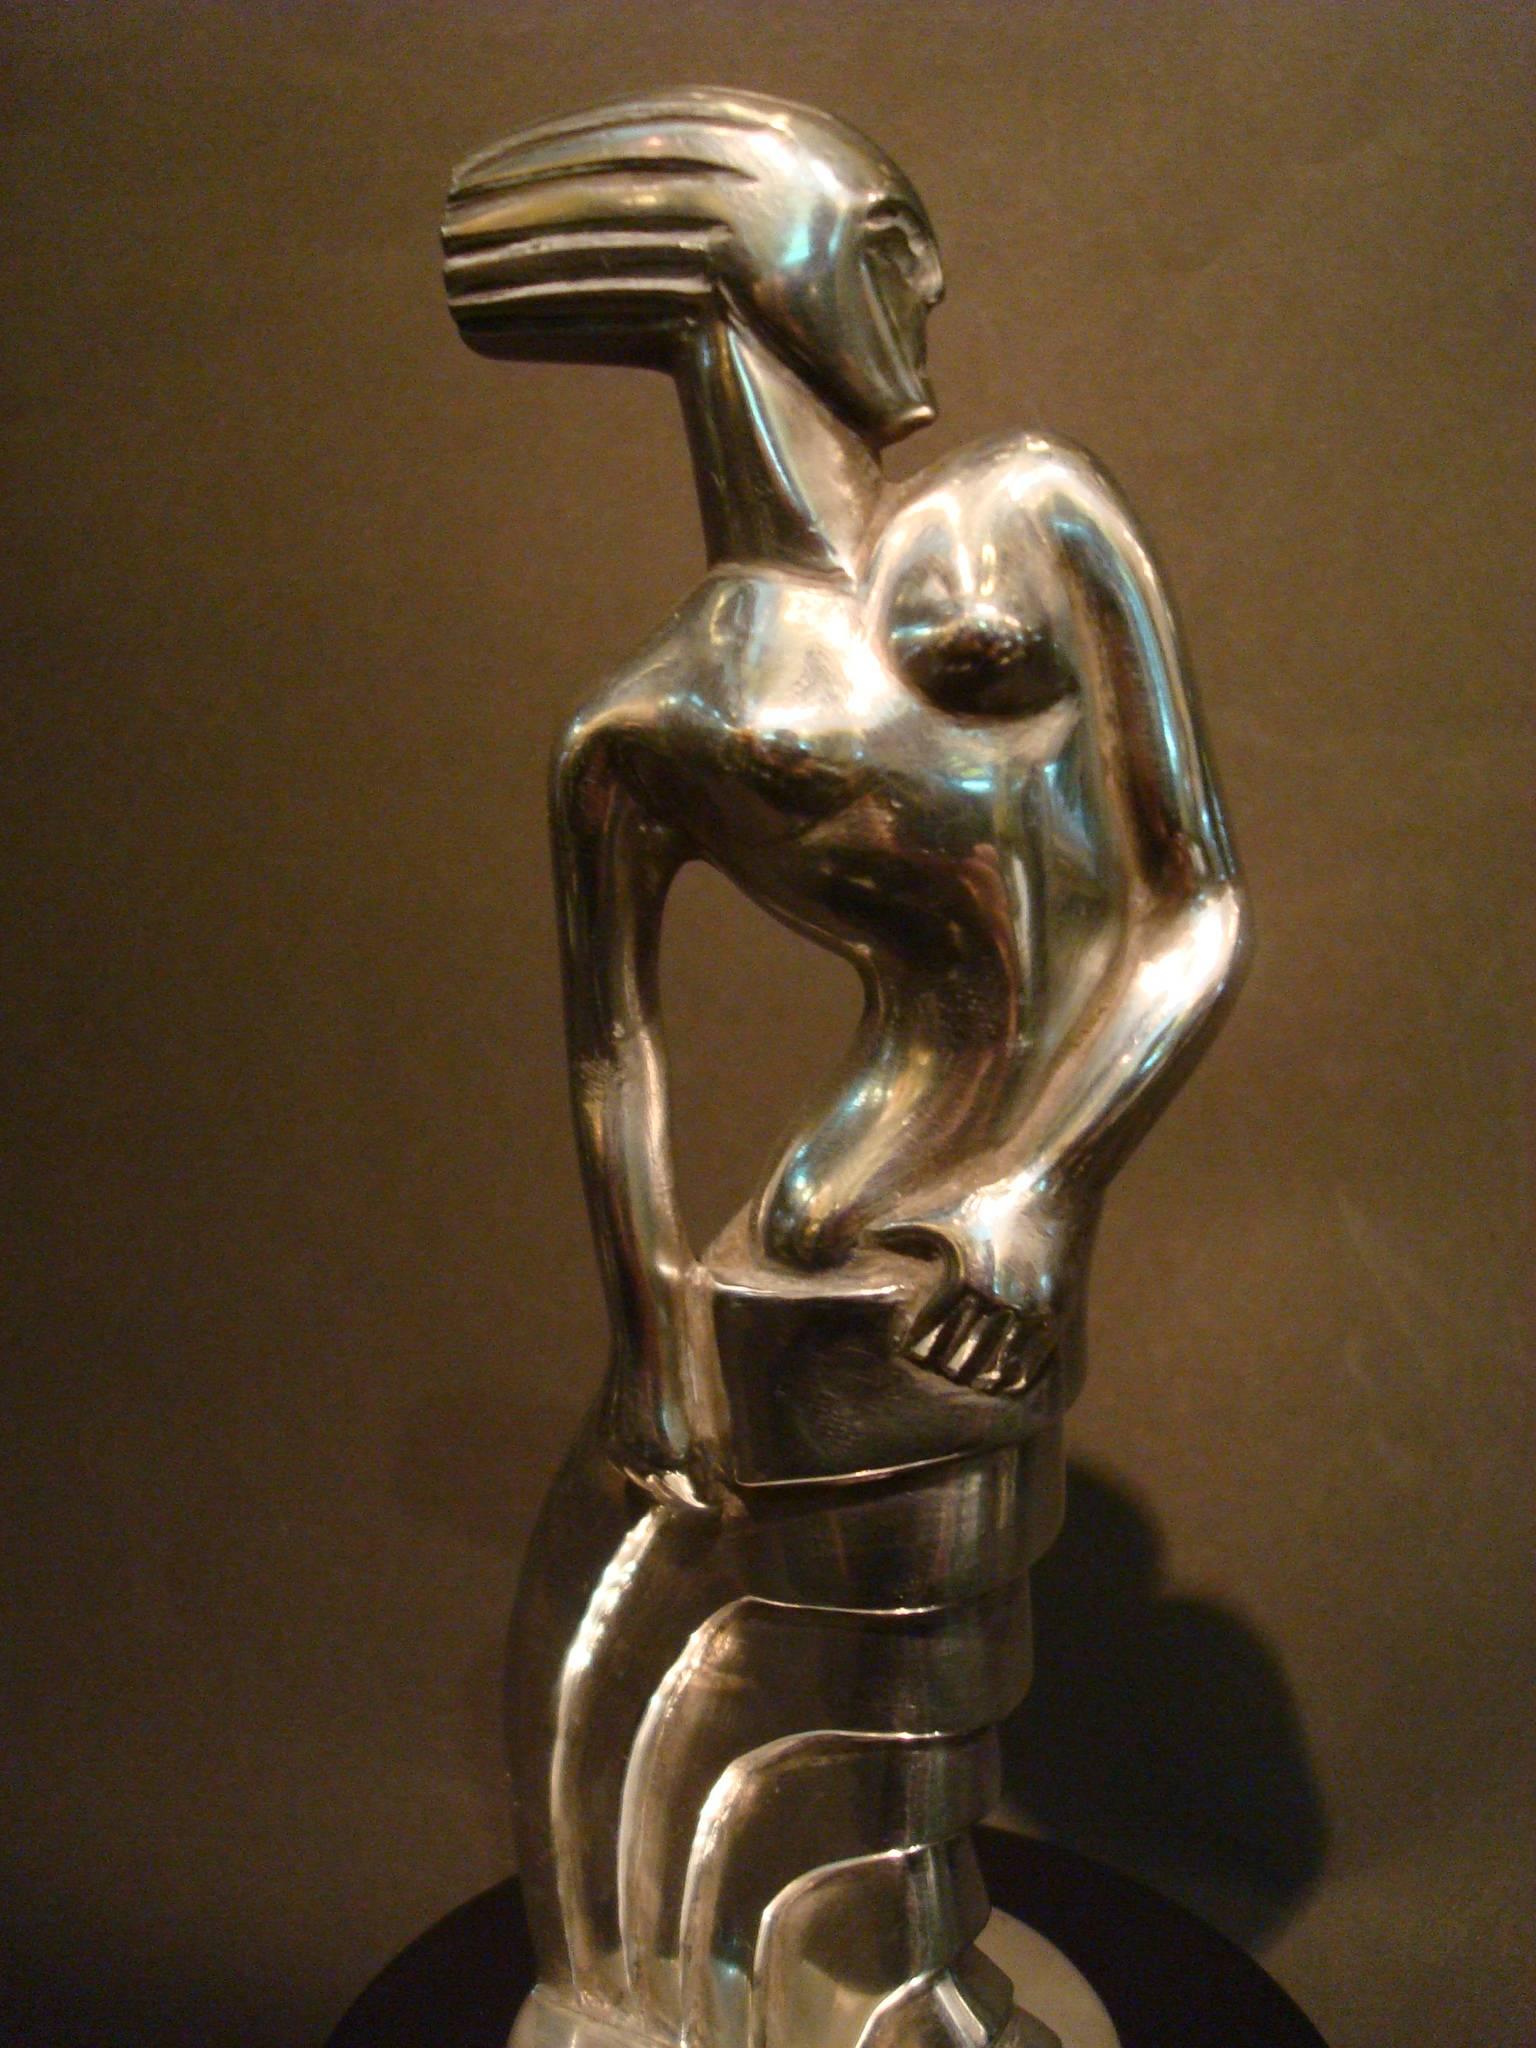 Stylized Art Deco woman.
Rare car mascot – hood ornament. Stylized Art Deco woman, silver-plated bronze, marble base. Signed: S. Rueff (France 1896-1978). mounted on a custom ebonized base. This model was created for the 